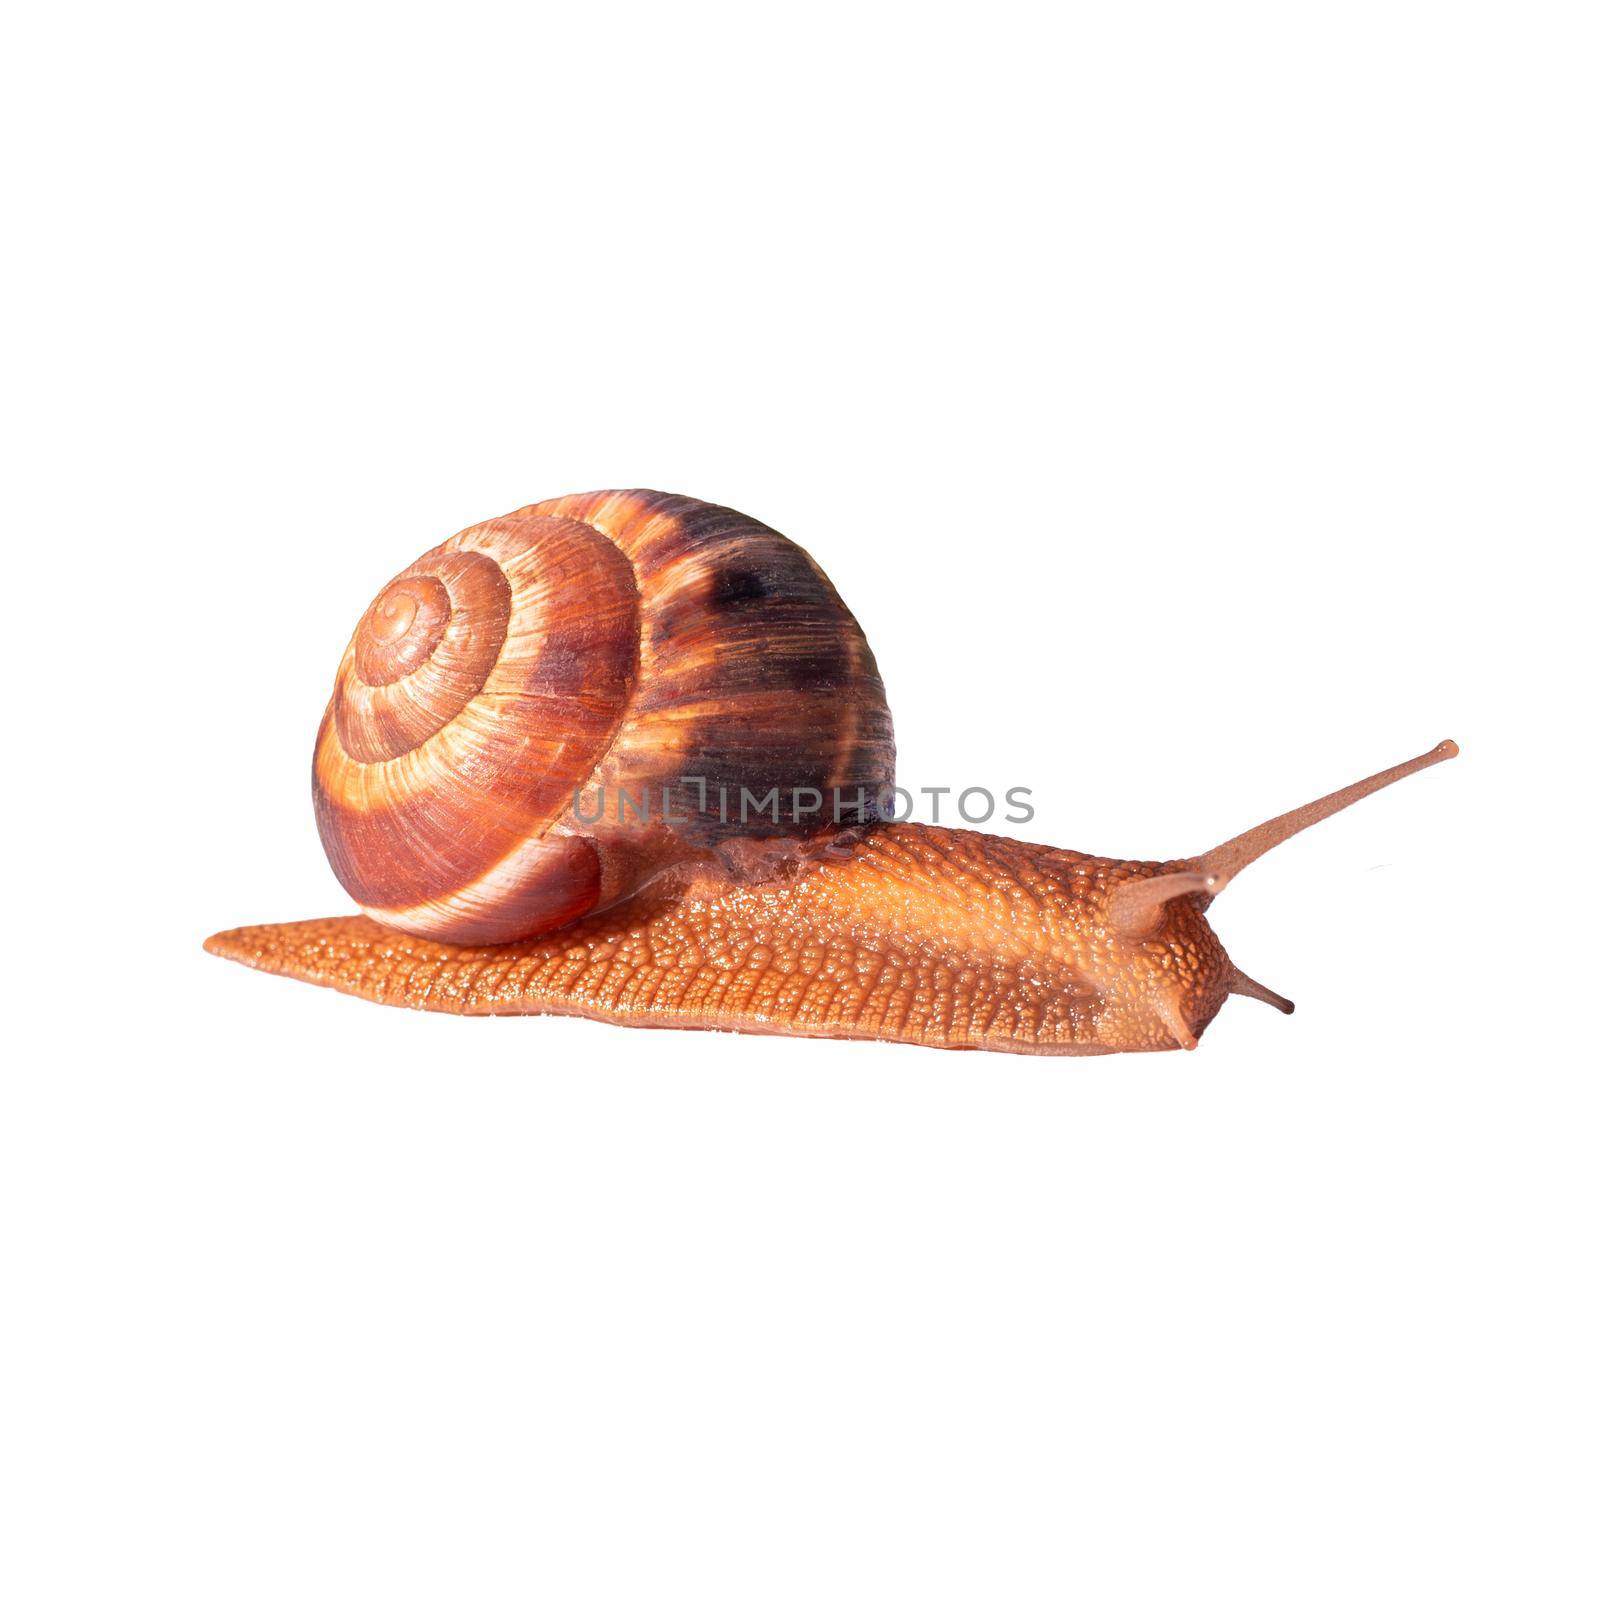 A grape brown snail with a large shell is crawling. Isolated image for print, face cream. Healing snail mucin by levnat09